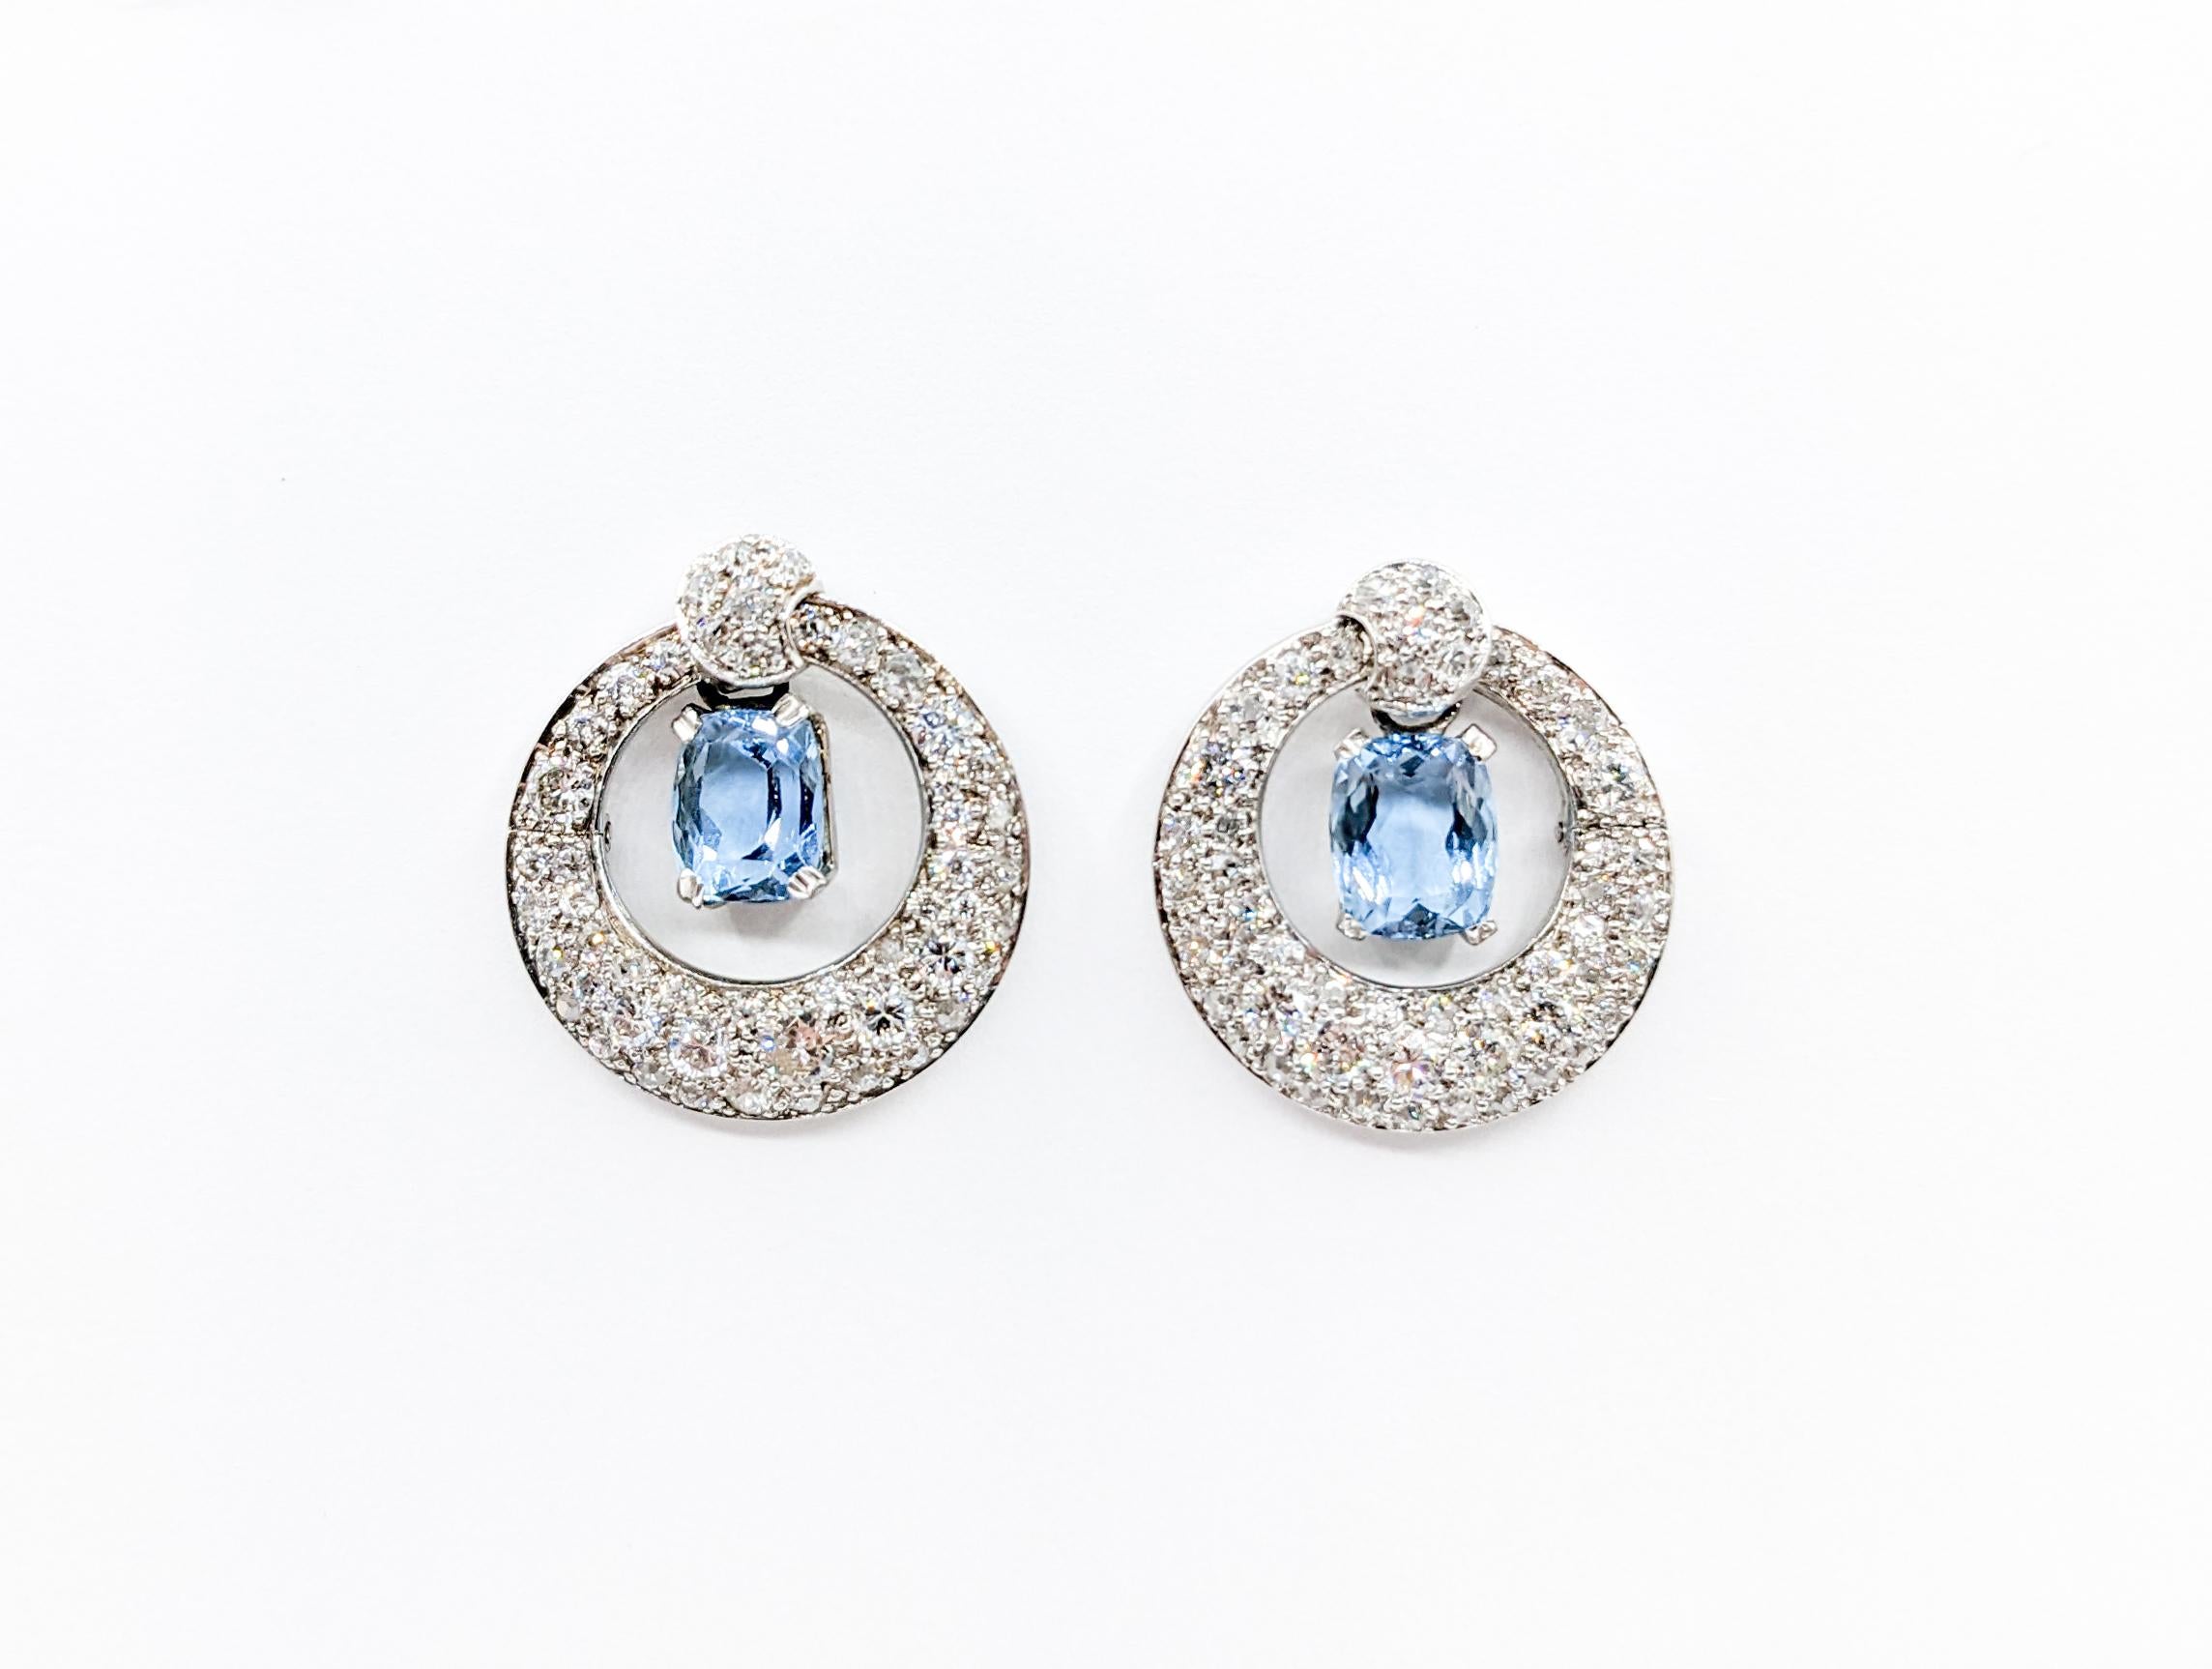 Glamorous Platinum Aquamarine & Pave Diamond Drop Earrings In Excellent Condition For Sale In Bloomington, MN